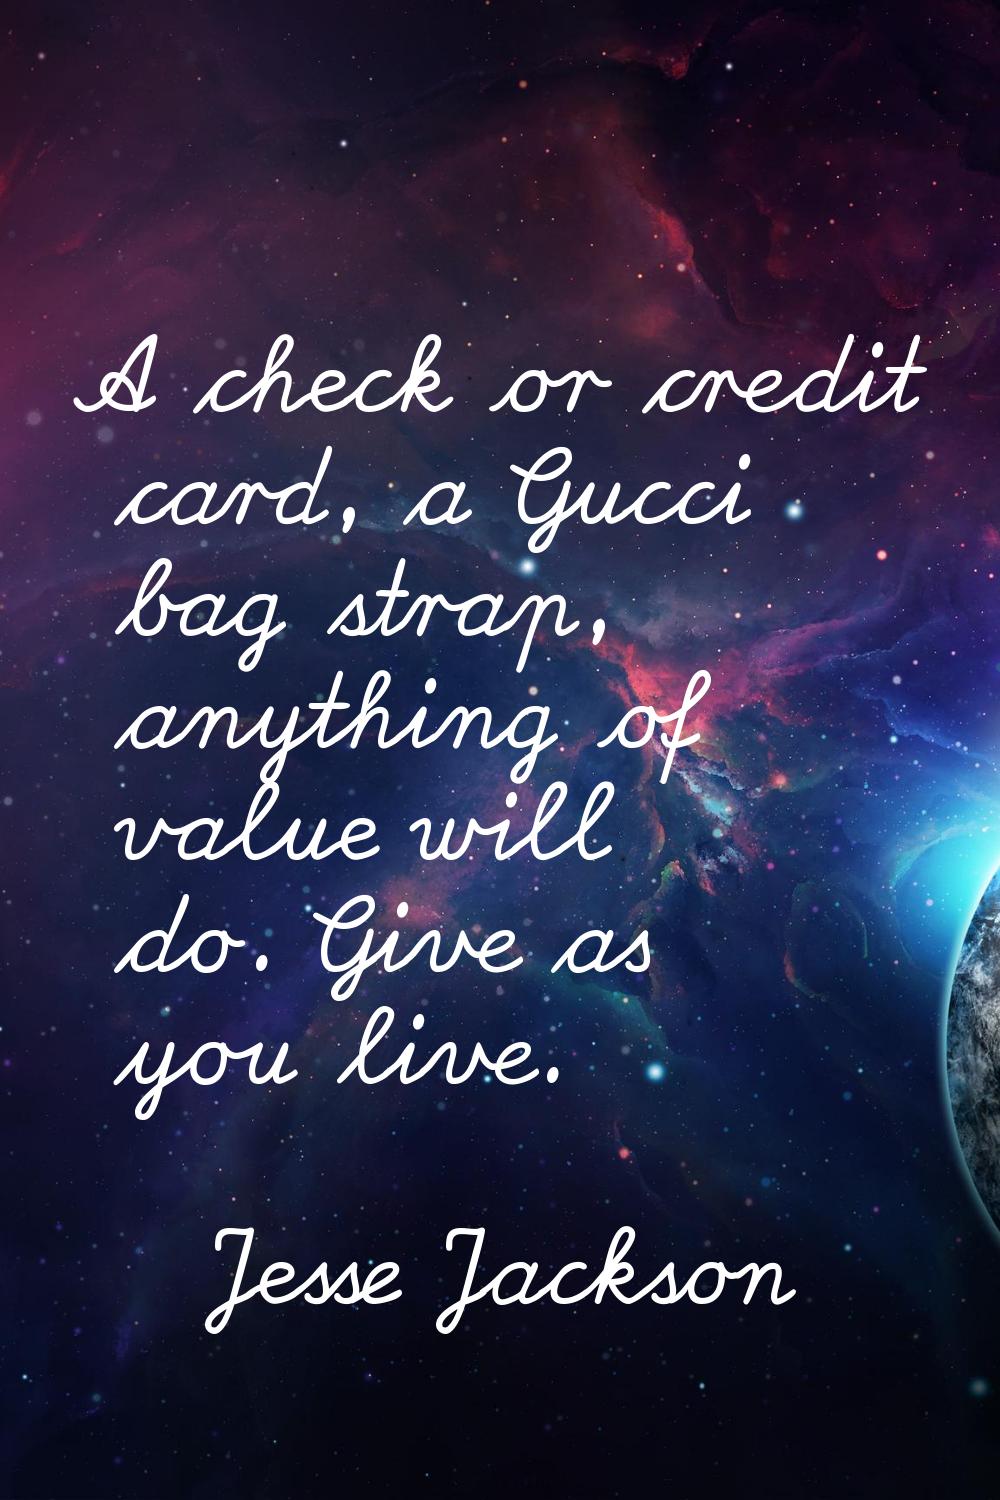 A check or credit card, a Gucci bag strap, anything of value will do. Give as you live.